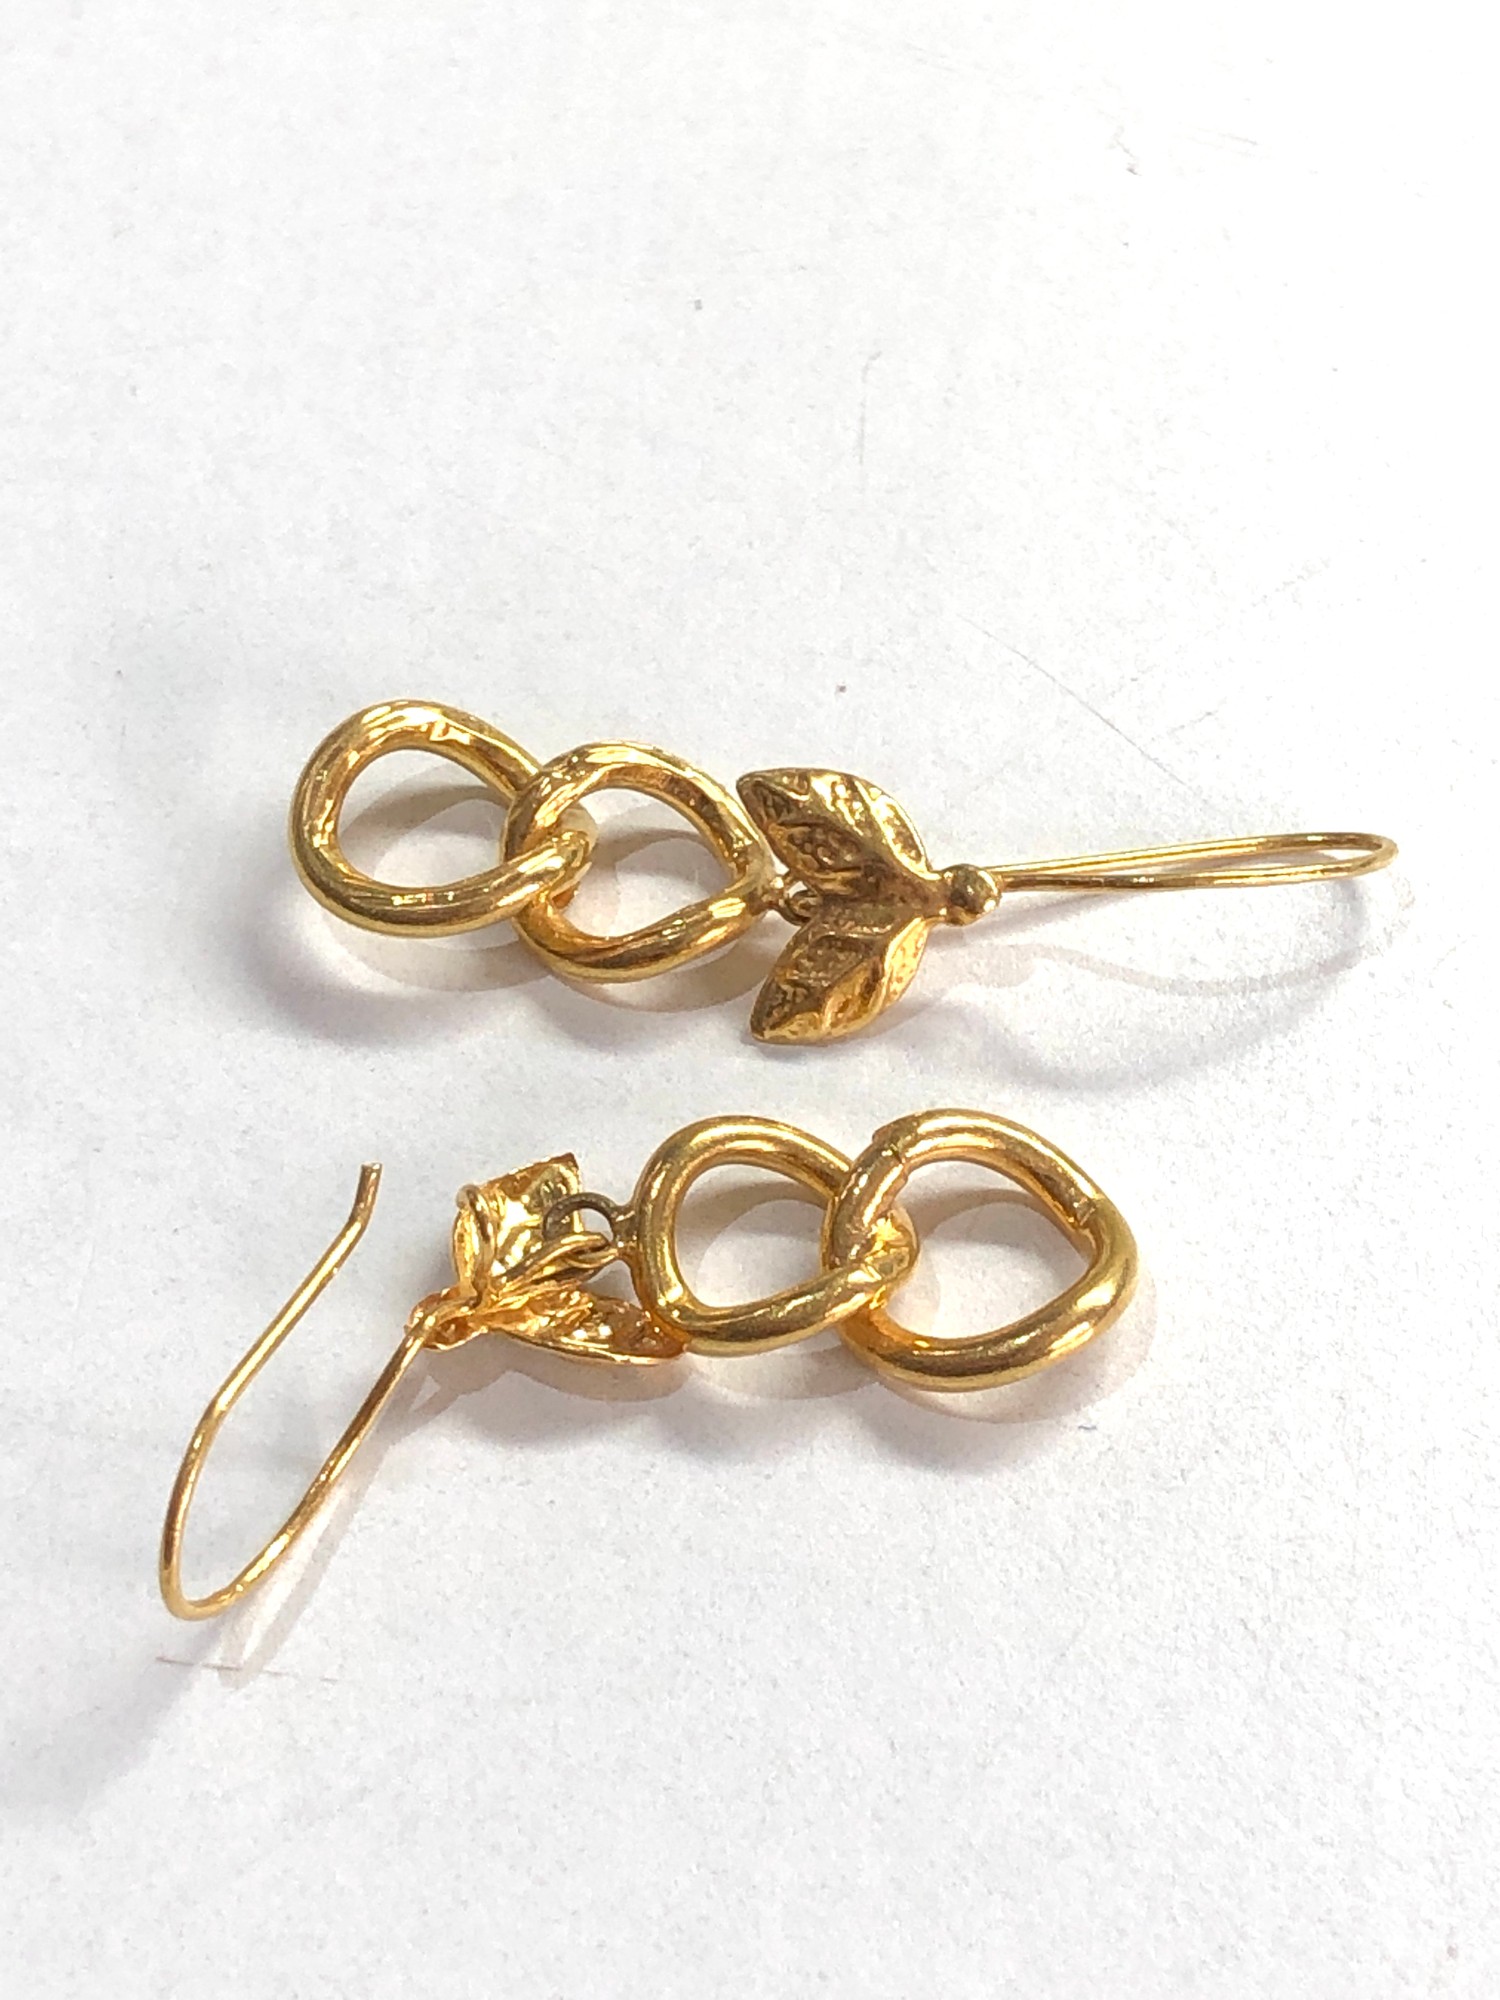 18ct gold textured drop earrings with foliate design 3.5g - Image 2 of 2